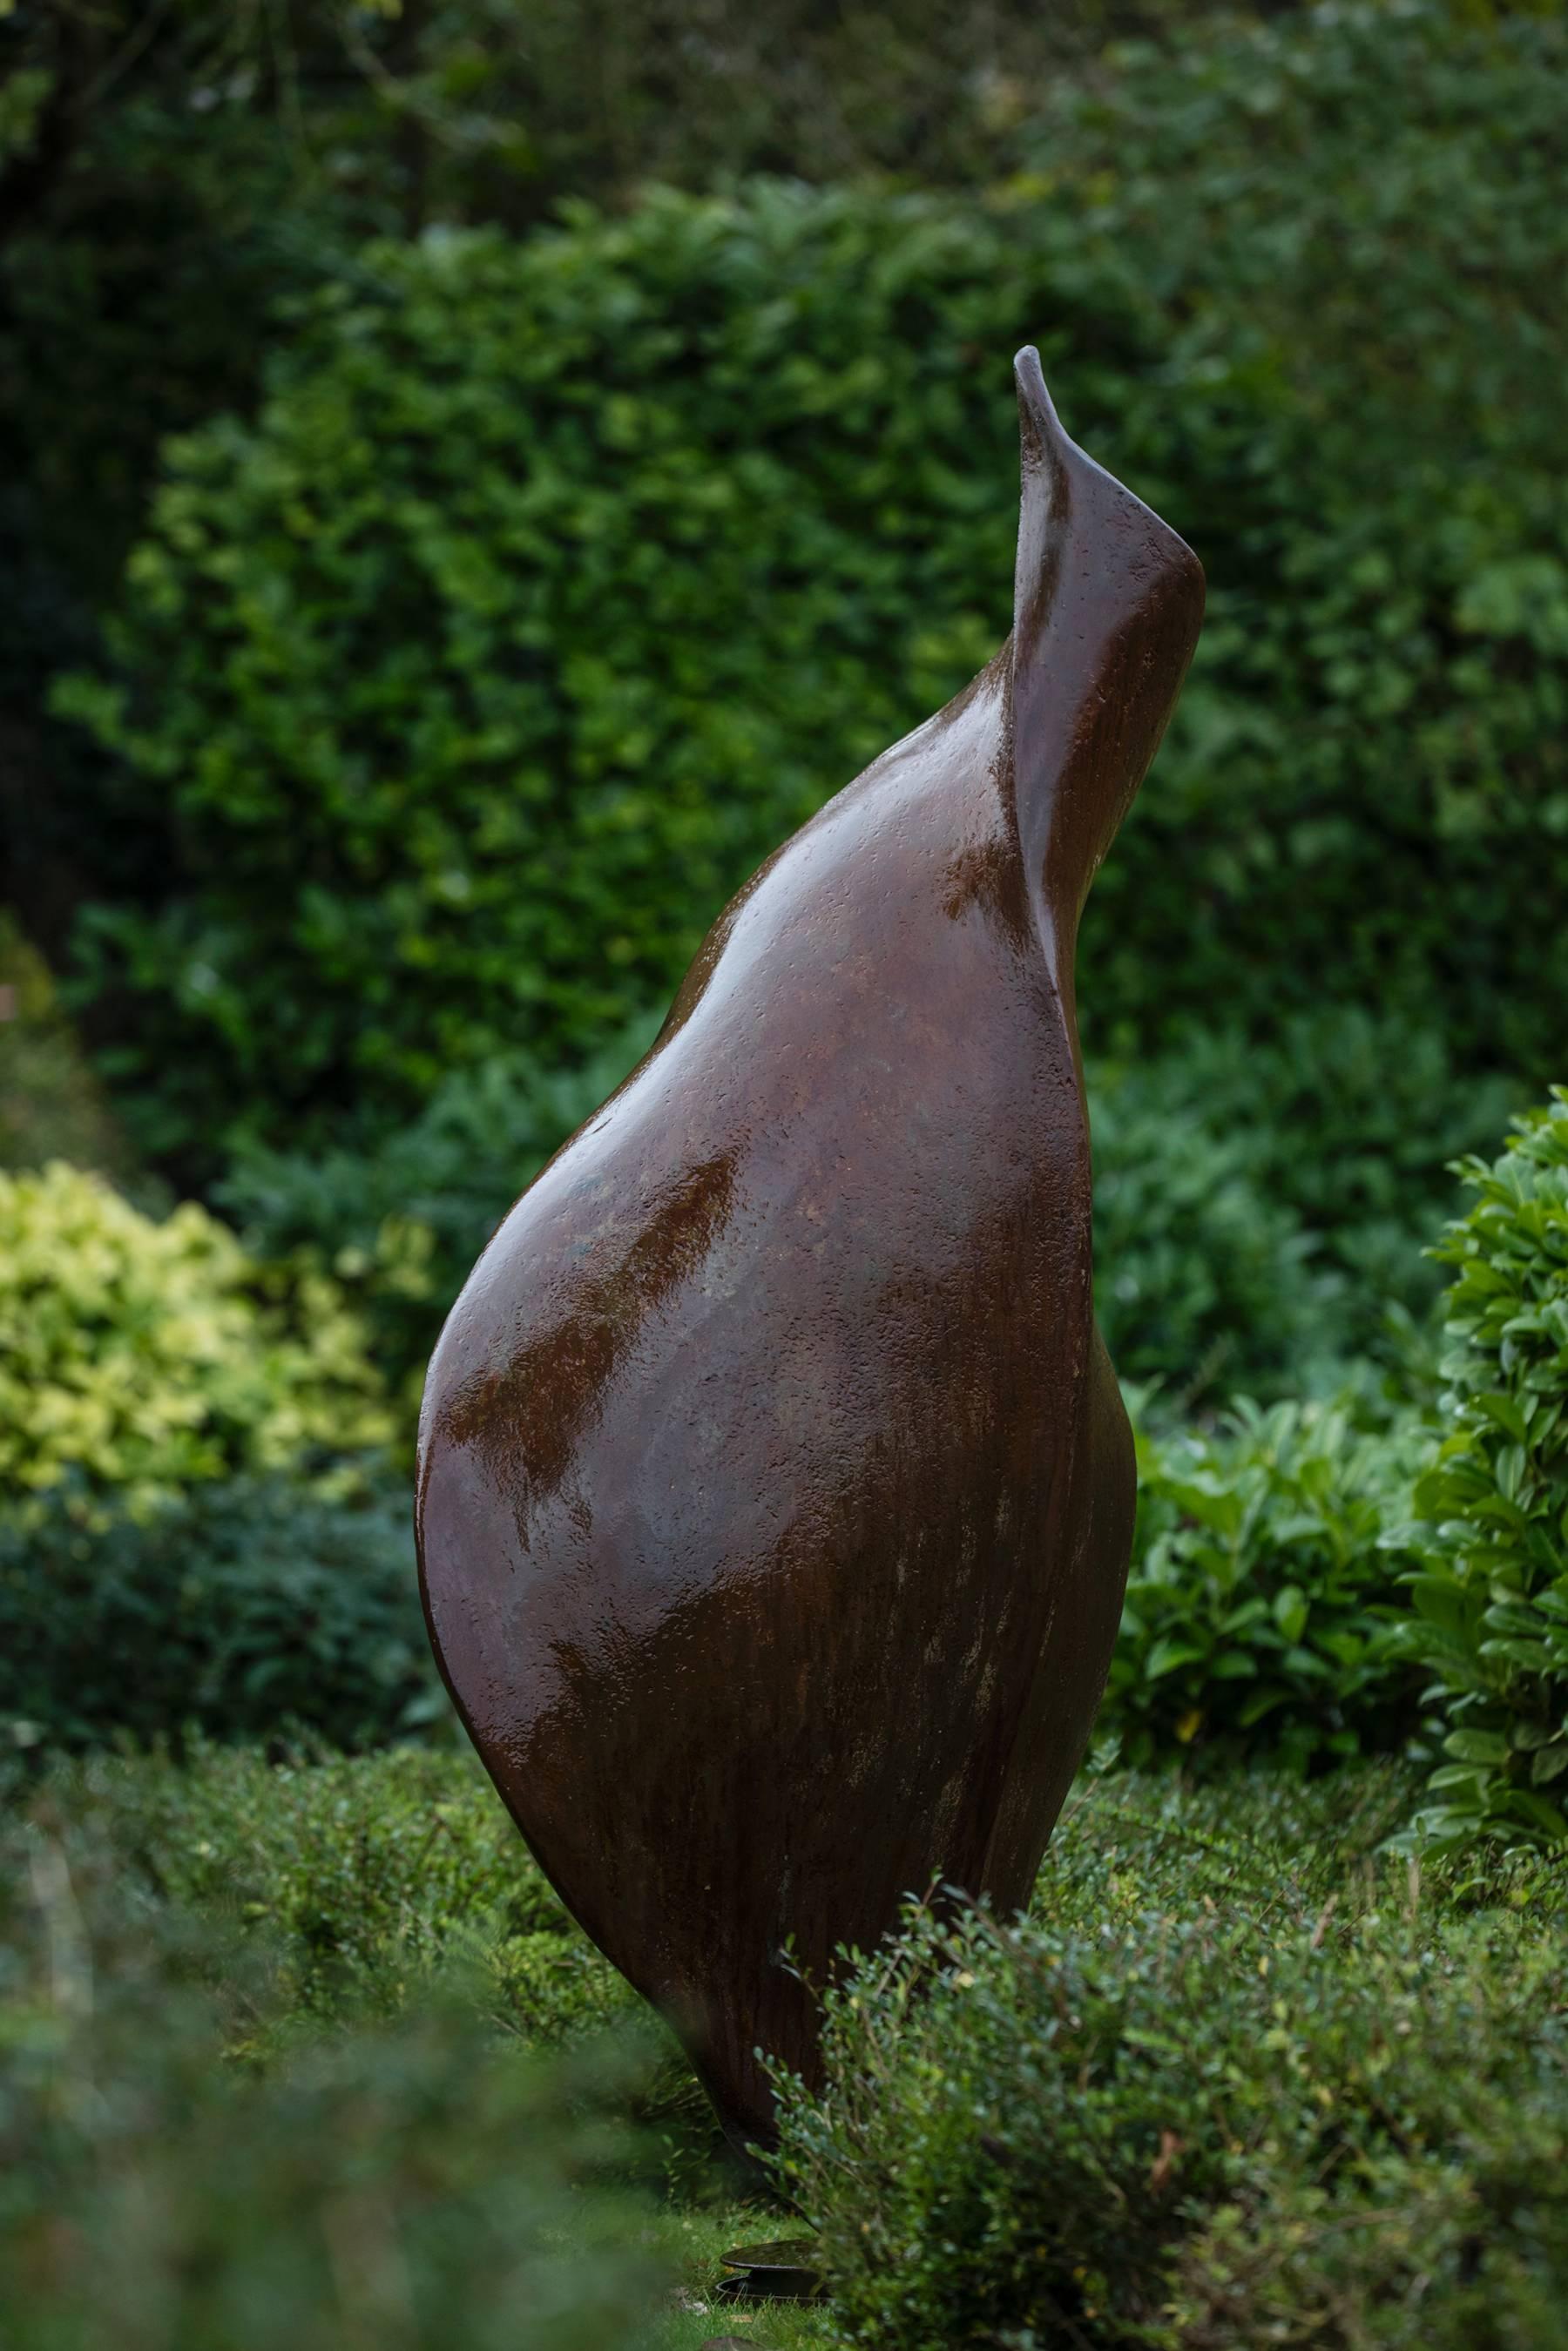 Anne Curry is a member of the Royal British Society of Sculptors. Her outdoor sculpture has been exhibited at major exhibition gardens around the UK including the Royal Botanic Gardens at Kew, and shows of international reputation including the most